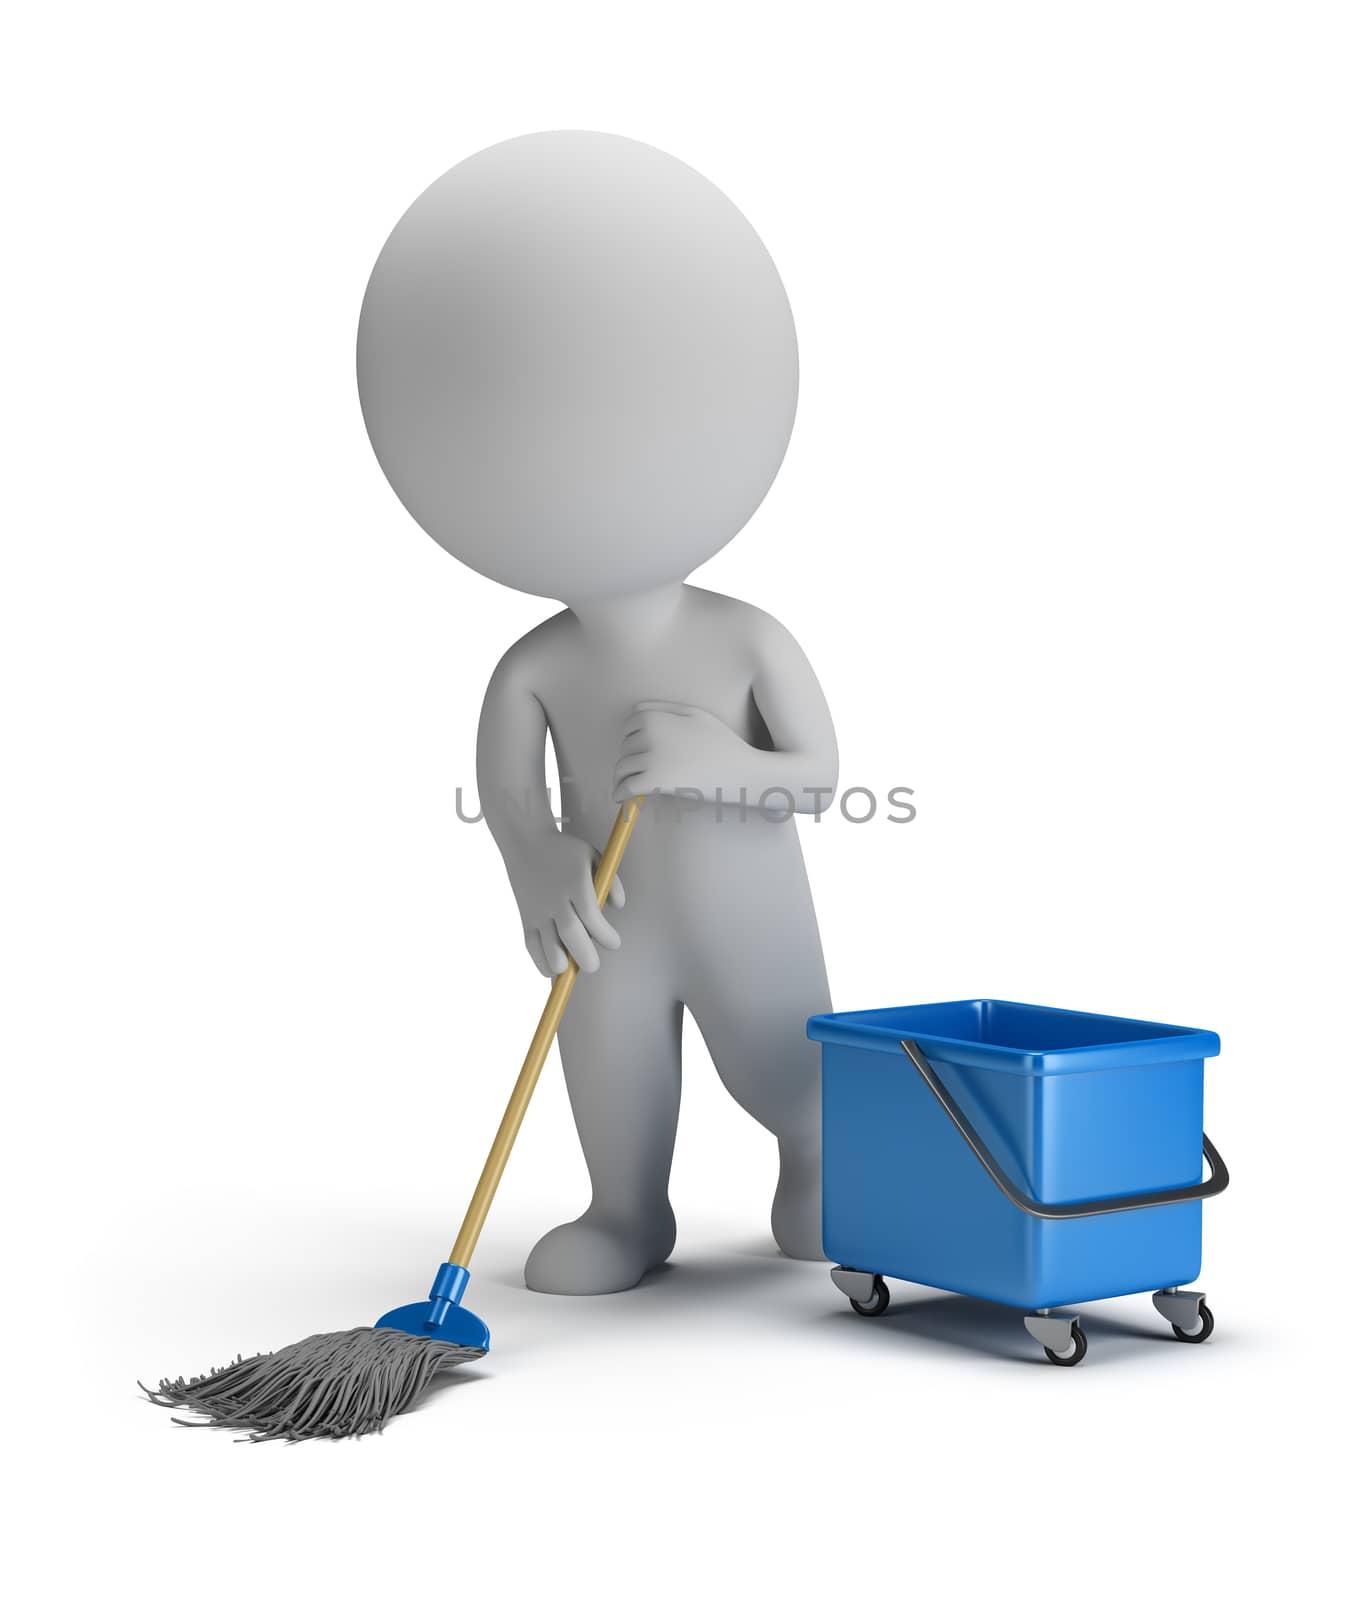 3d small person cleaner with a mop and bucket. 3d image. Isolated white background.